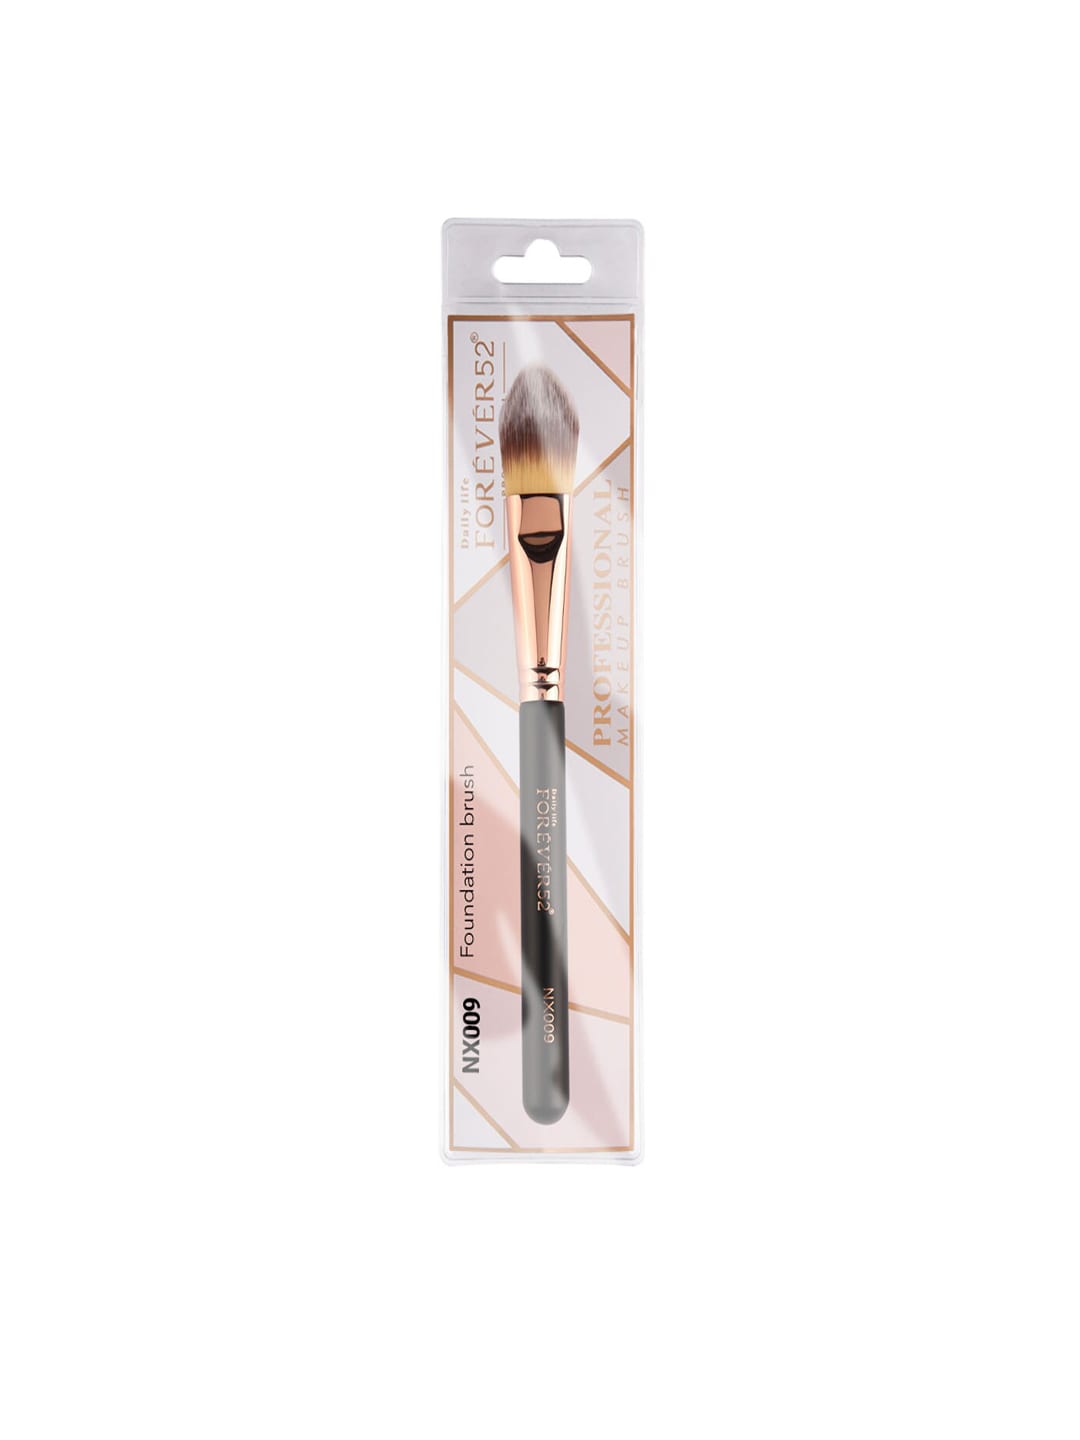 Daily Life Forever52 Foundation brush NX009 Price in India